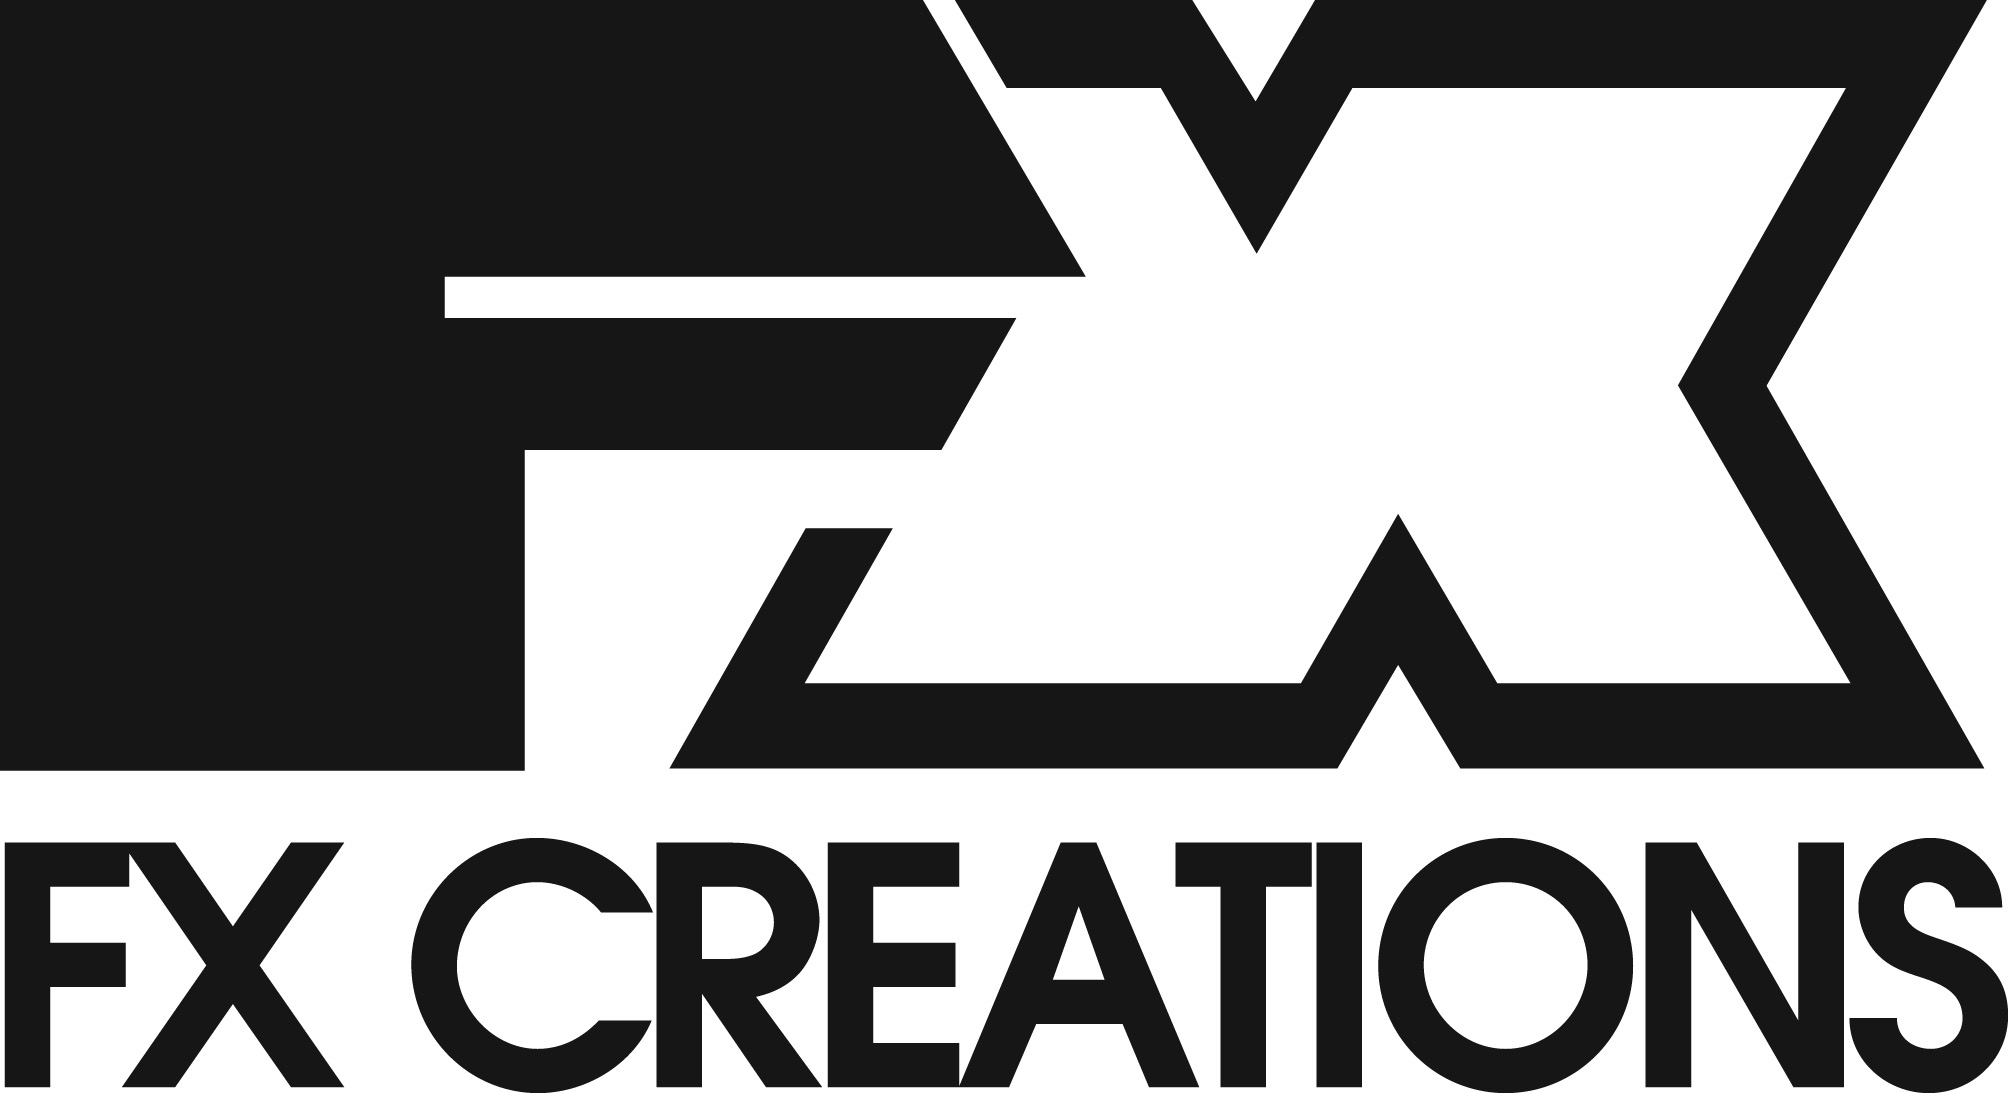 FX Creations
10% off on regular-priced items, extra 10% off on 20% or less discounted items